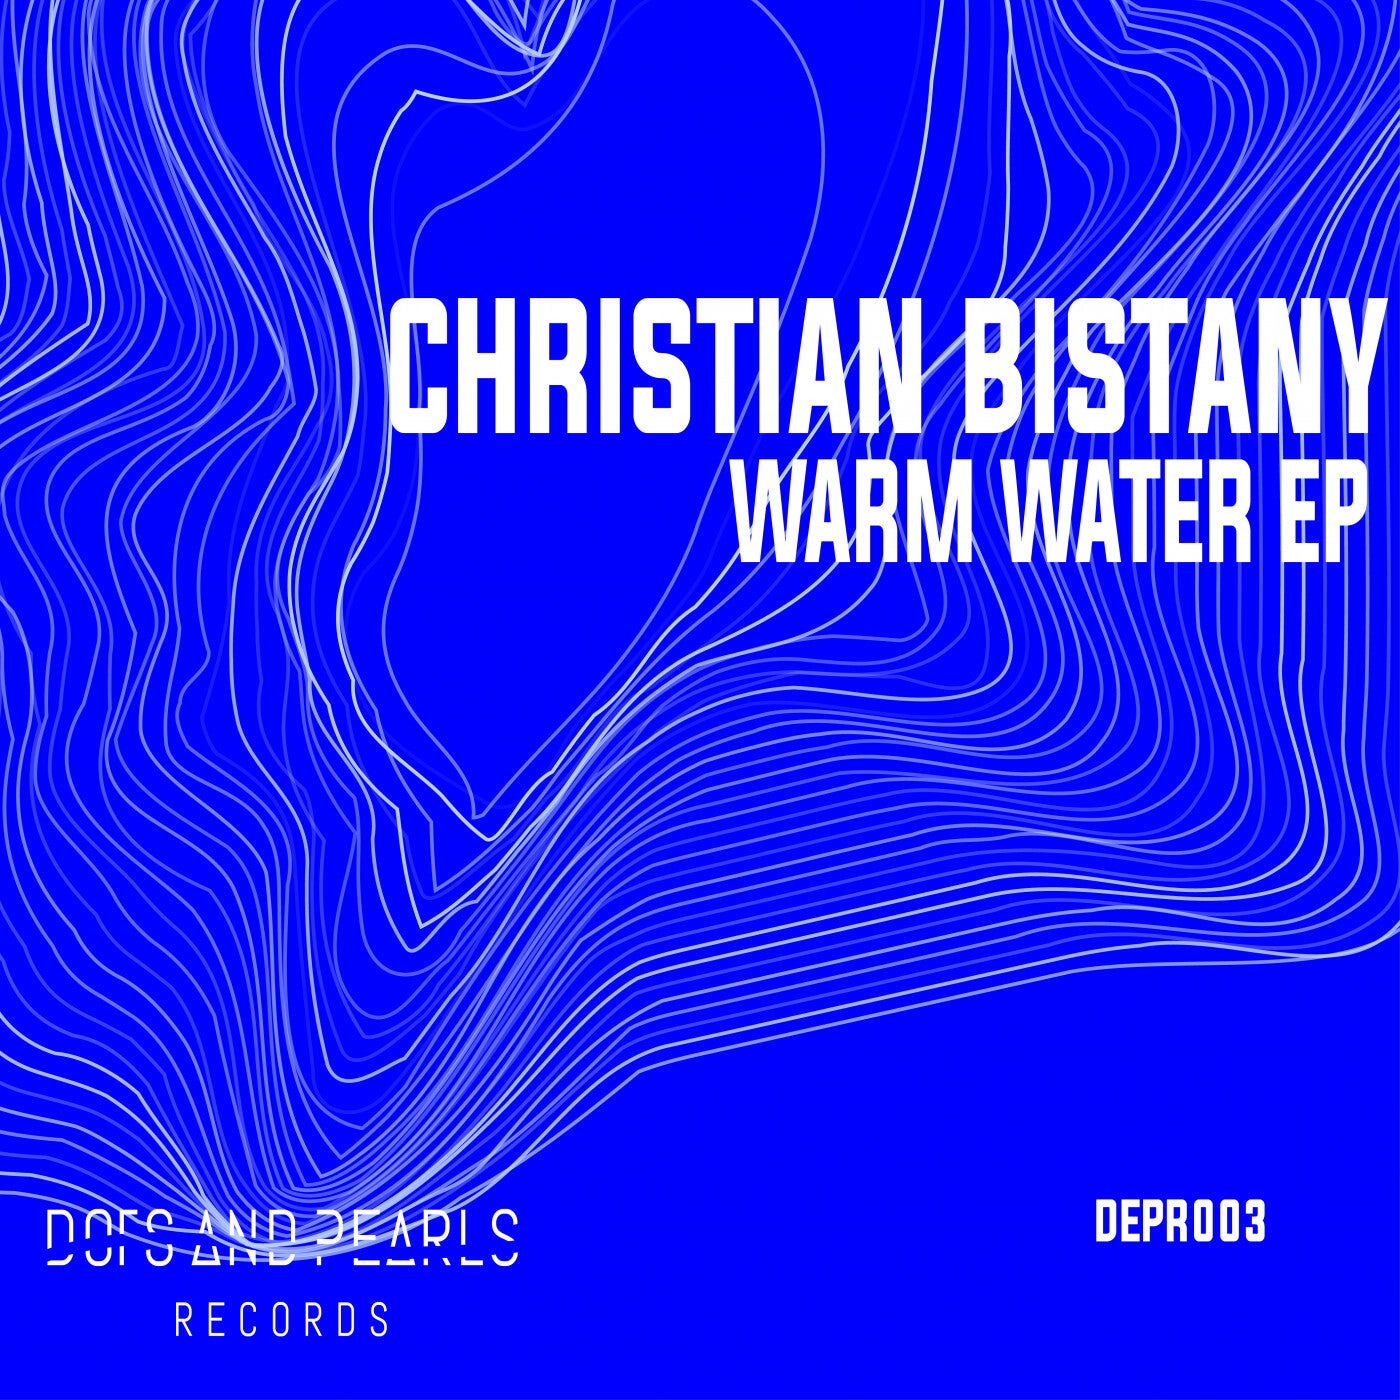 Warm water EP